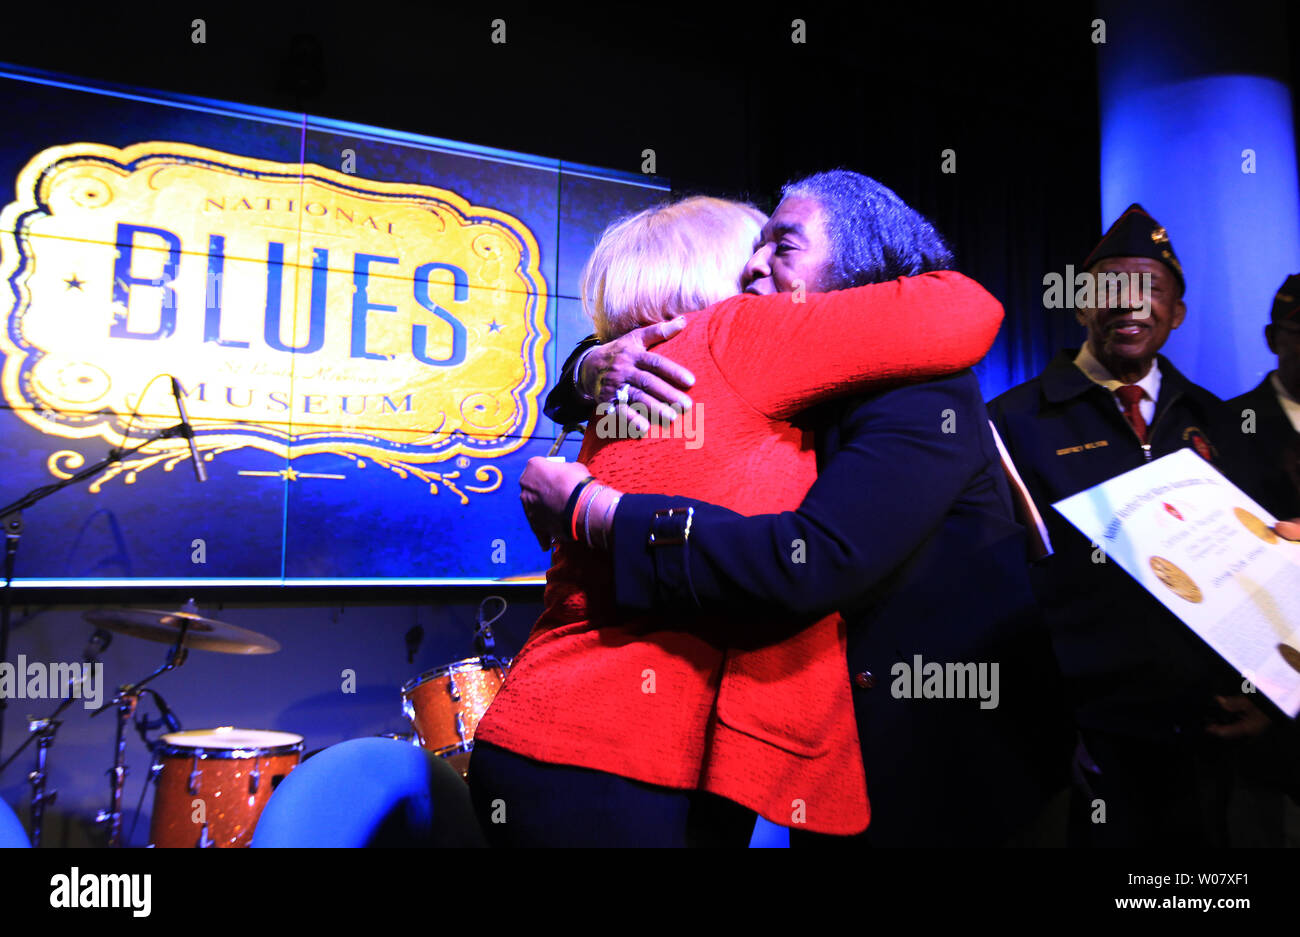 Frances Johnson, widow of the late jazz and blues pianist Johnnie Johnson is hugged by U.S. Senator Claire McCaskill after receiving the Congressional Gold Medal during a ceremony honoring her husband, at the National Blues Museum in St. Louis on November 28, 2016. Johnson, who lived in St. Louis, was a Montford Point Marine, the African-American Marines unit who endured racism and inspired social change while integrating the previously all-white Marine Corps during World War II. After his service, Johnson had a long musical career culminating with an induction into the Rock and Roll Hall of F Stock Photo